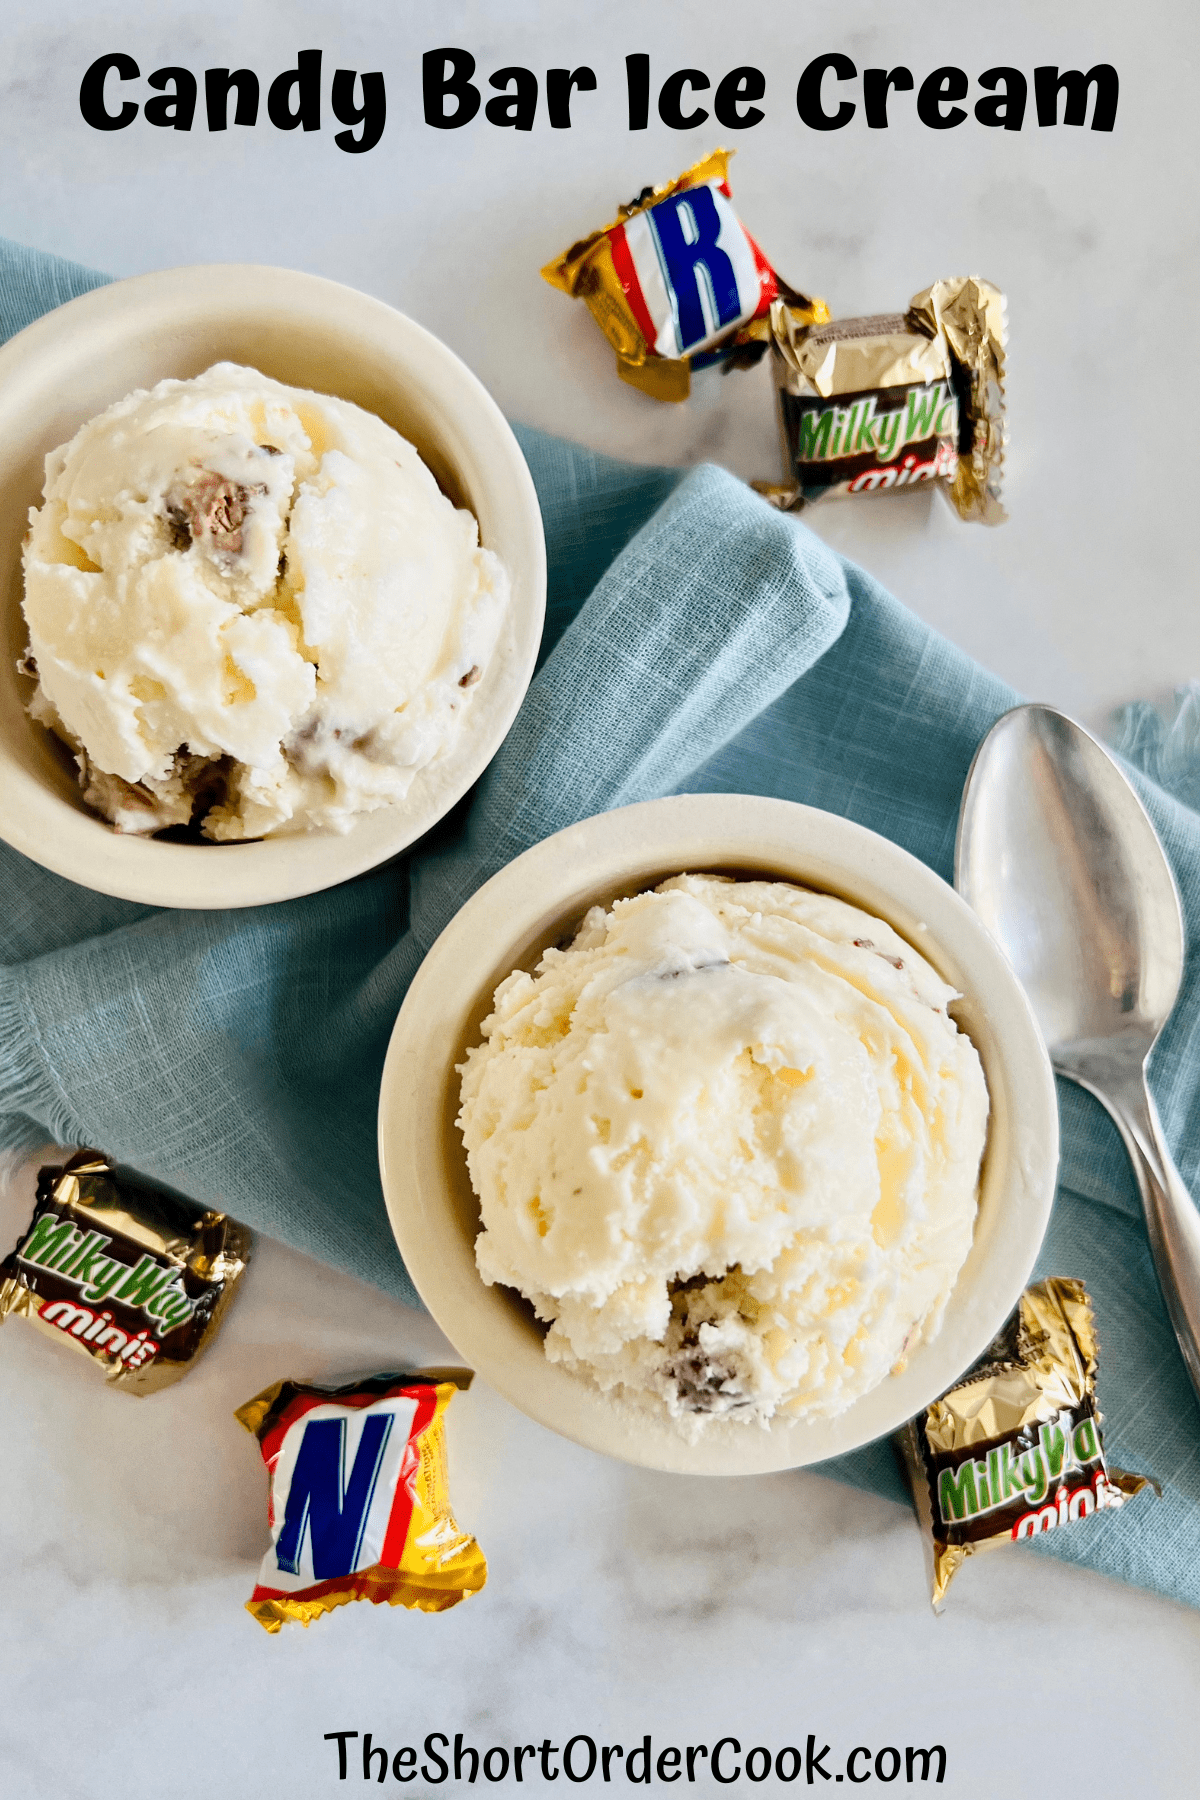 Two bowls with scoops of candy bar ice cream ready to eat with a spoon.